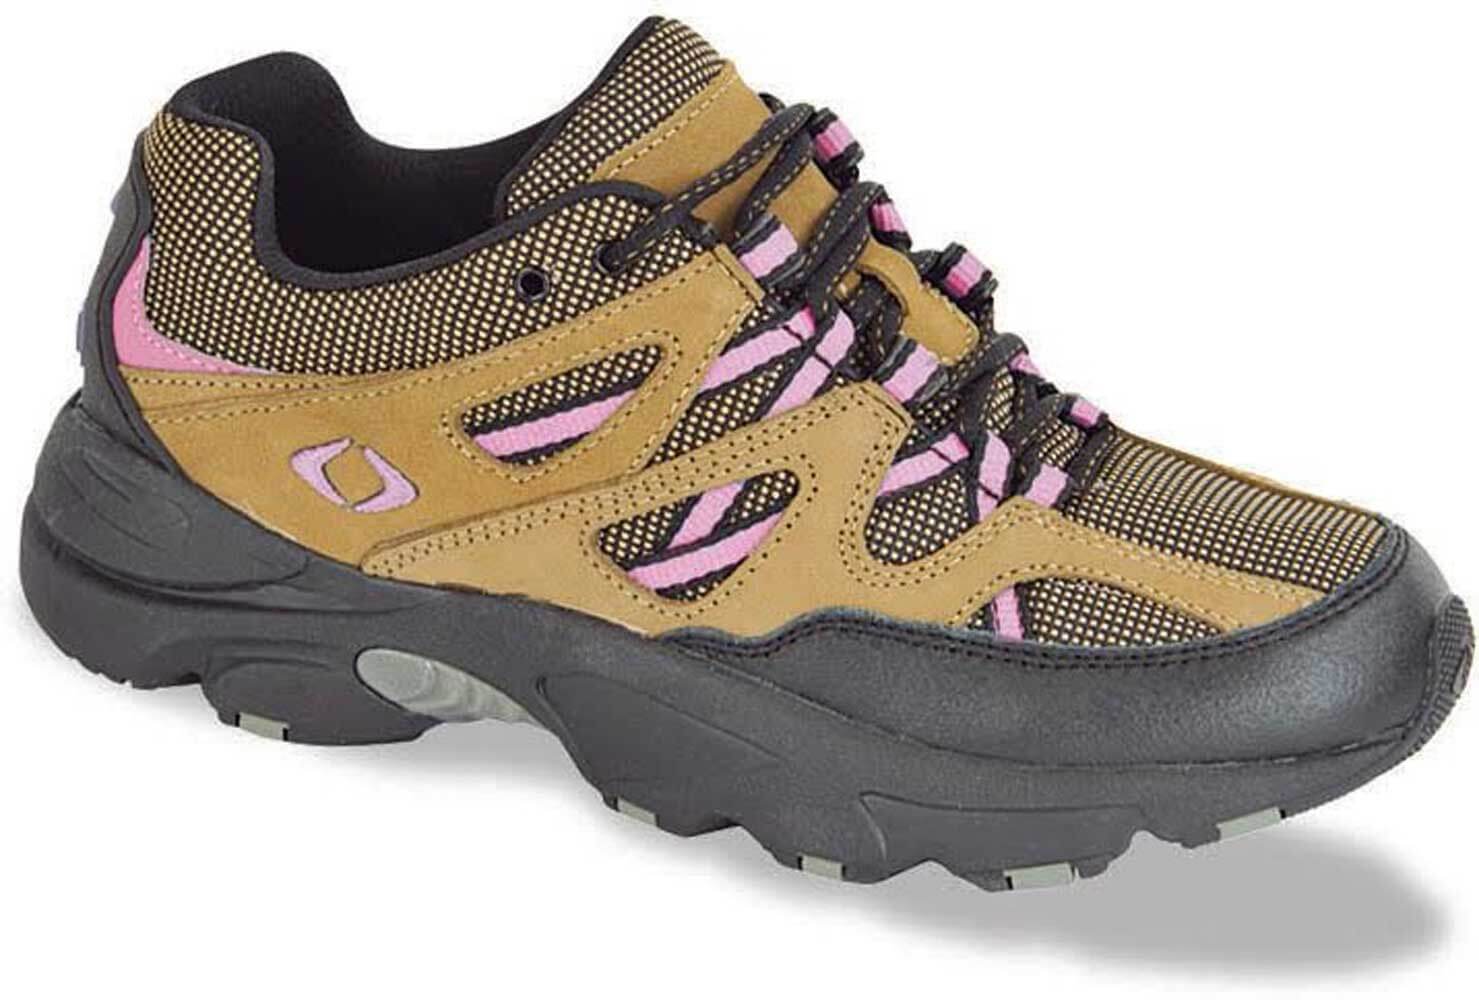 Apex Shoes V752W Sierra Women's Trail And Hiking Shoe - Comfort Orthopedic Diabetic Shoe -  Extra Wide - Extra Depth